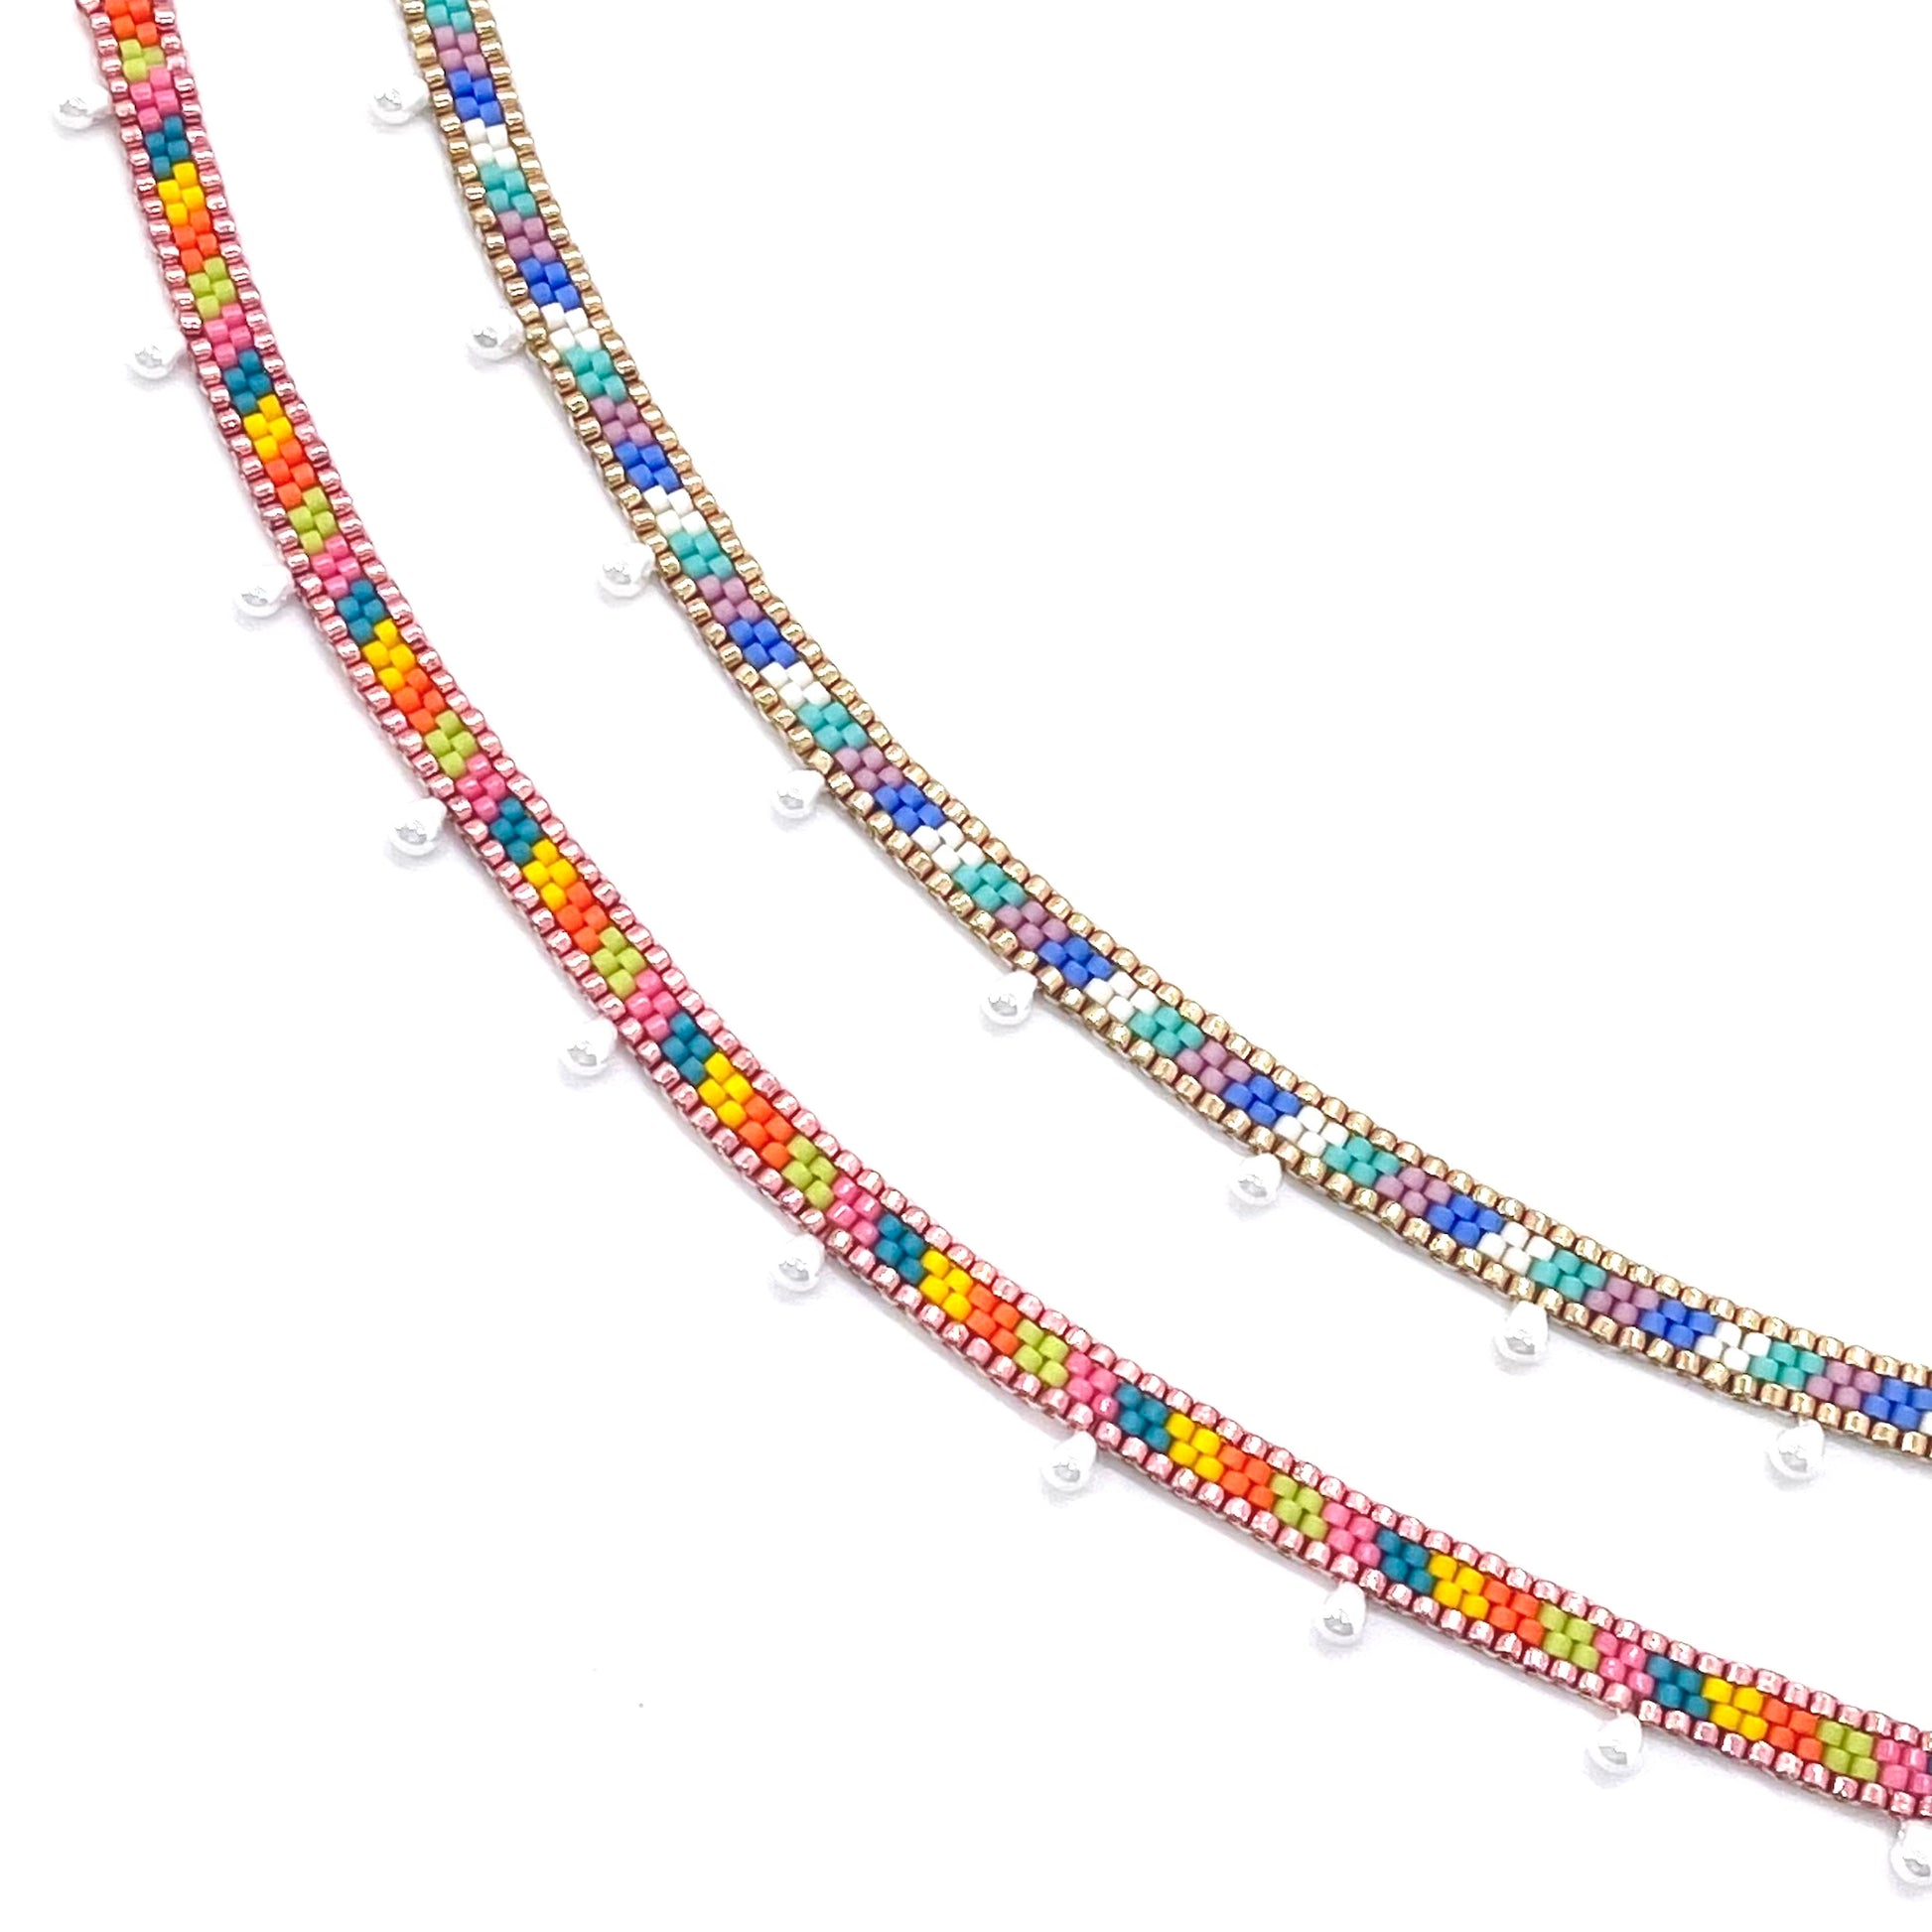 Beaded ankle bracelets with candy stripes in bright and pastel color options with pearl droplets. Peyote stitch anklets handwoven in NYC.